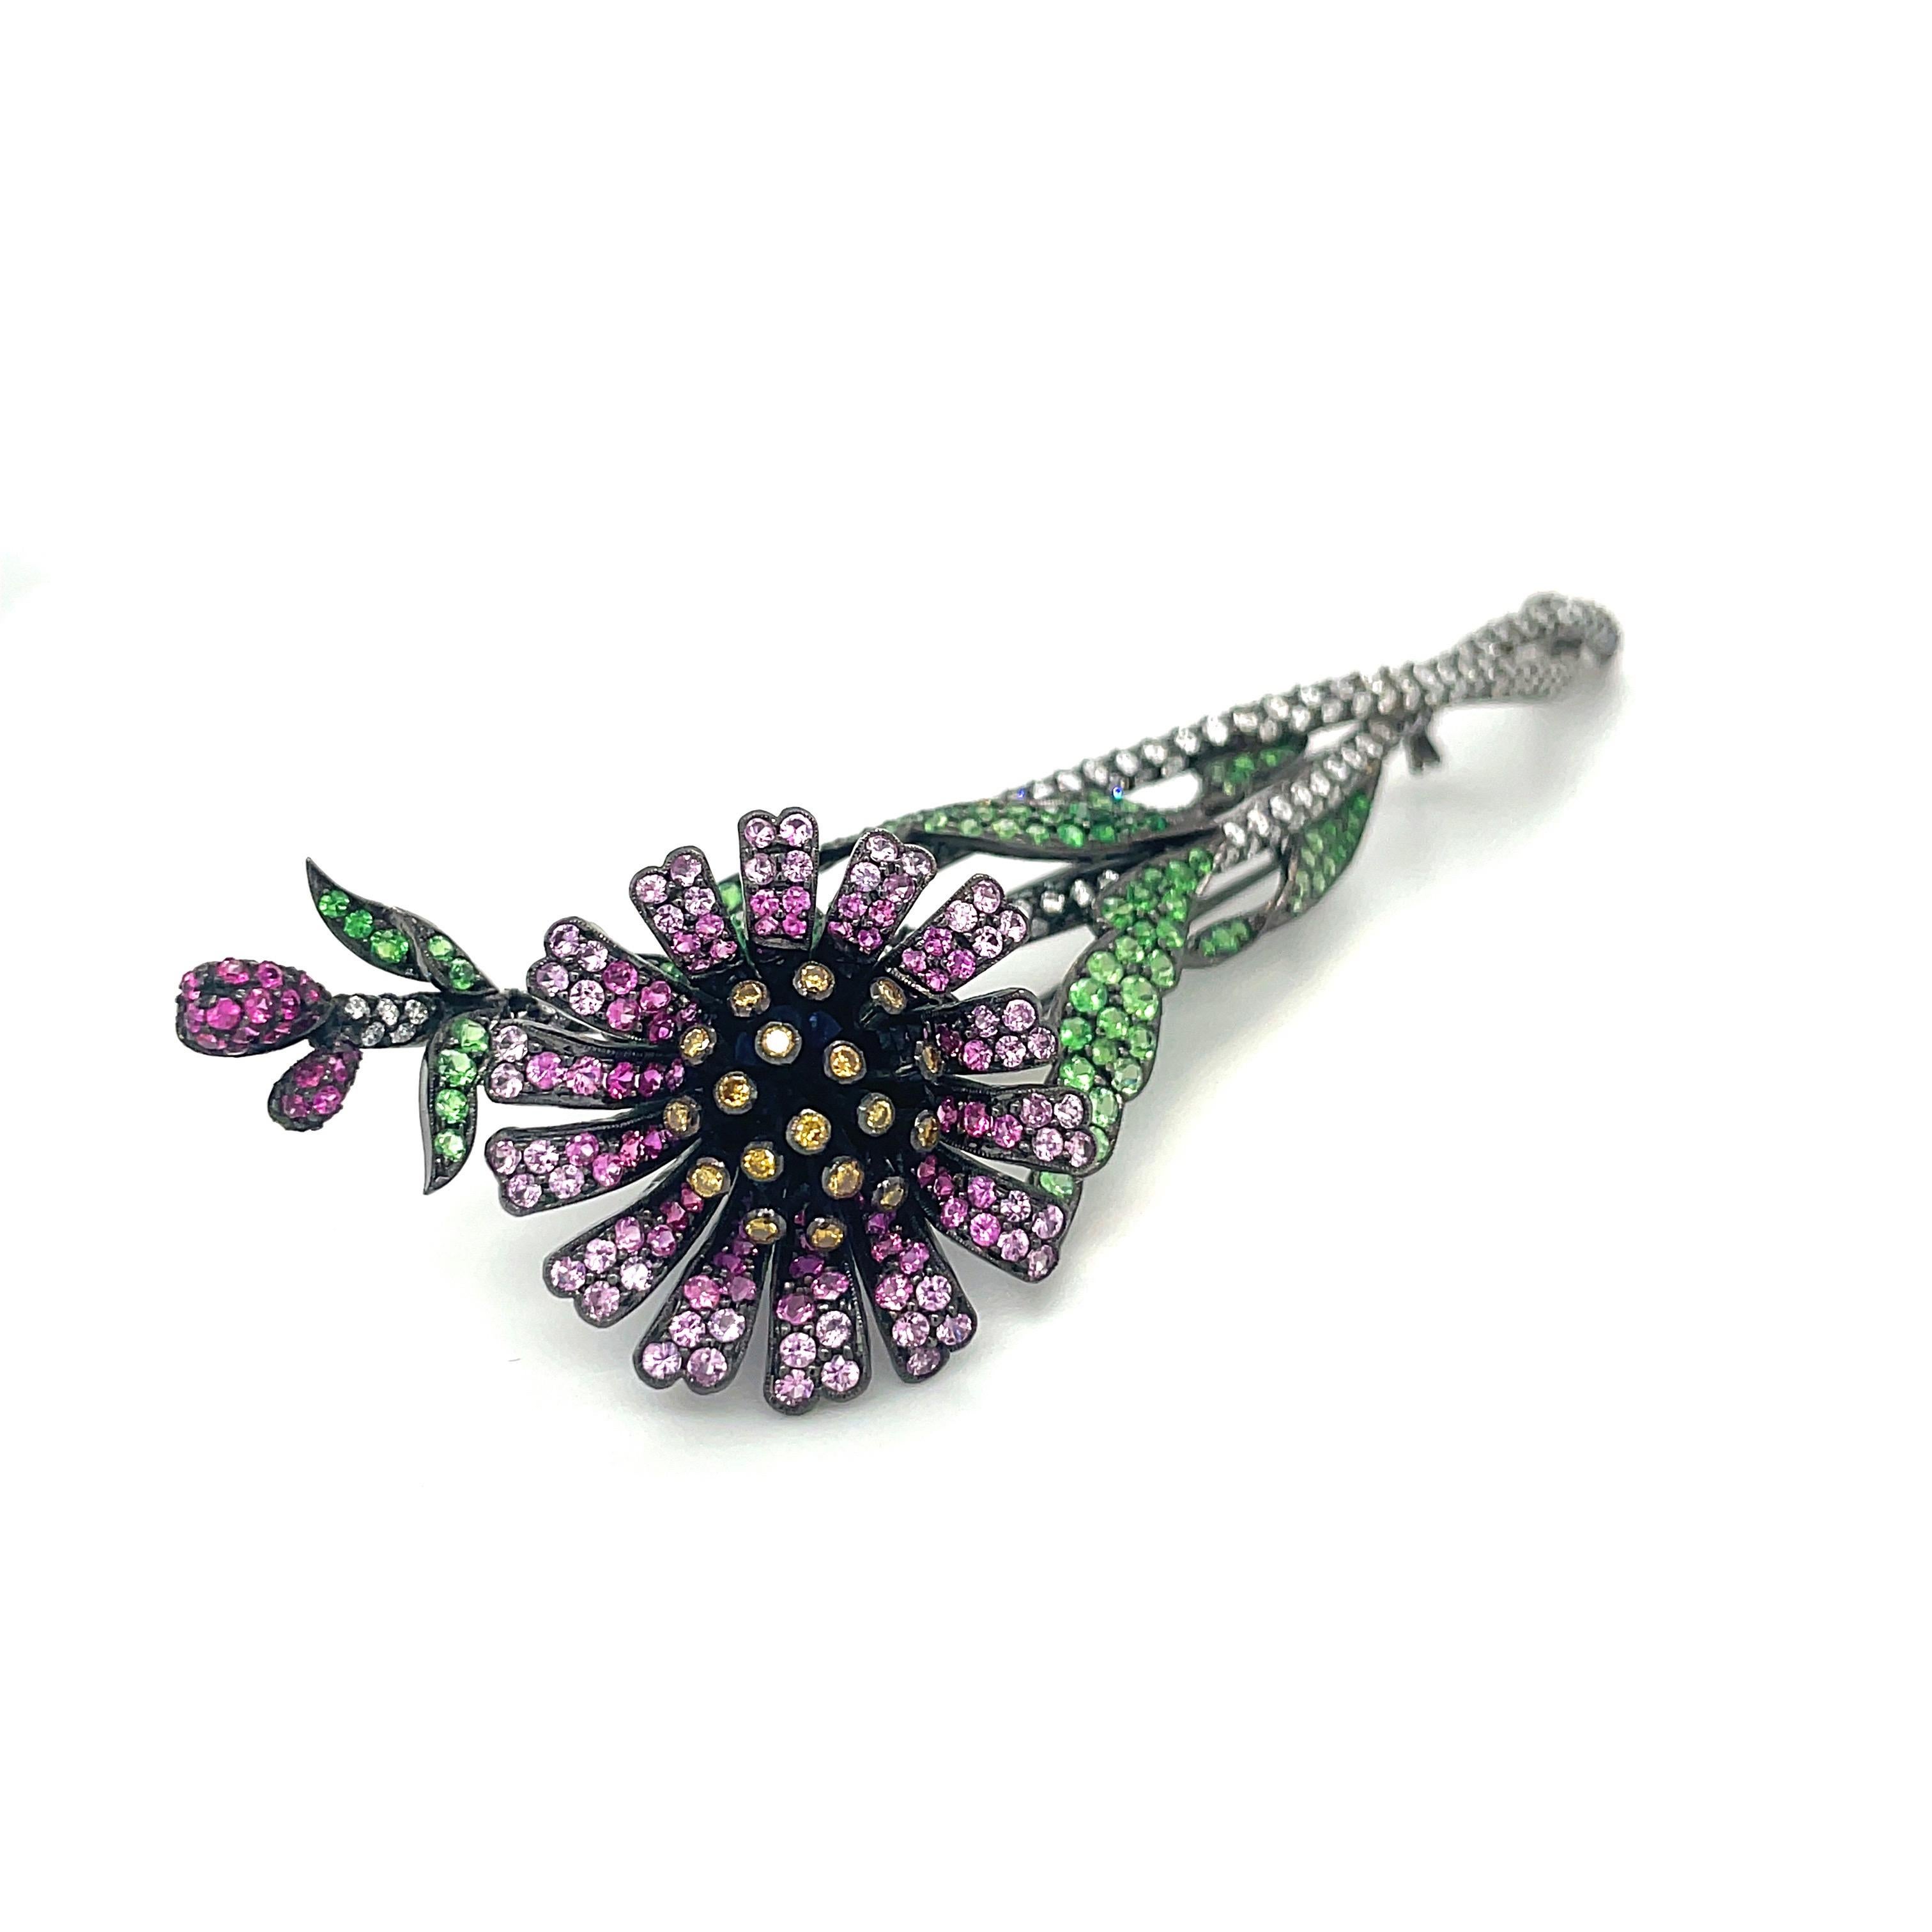 This stunning flower brooch composed of various shade of pink sapphires and tsavorites which pop against the dramatic blackened 18kt gold. Truly a work of art, this magnificent piece has 3.35cts of white diamonds, 0.24cts of yellow diamonds, 2.20